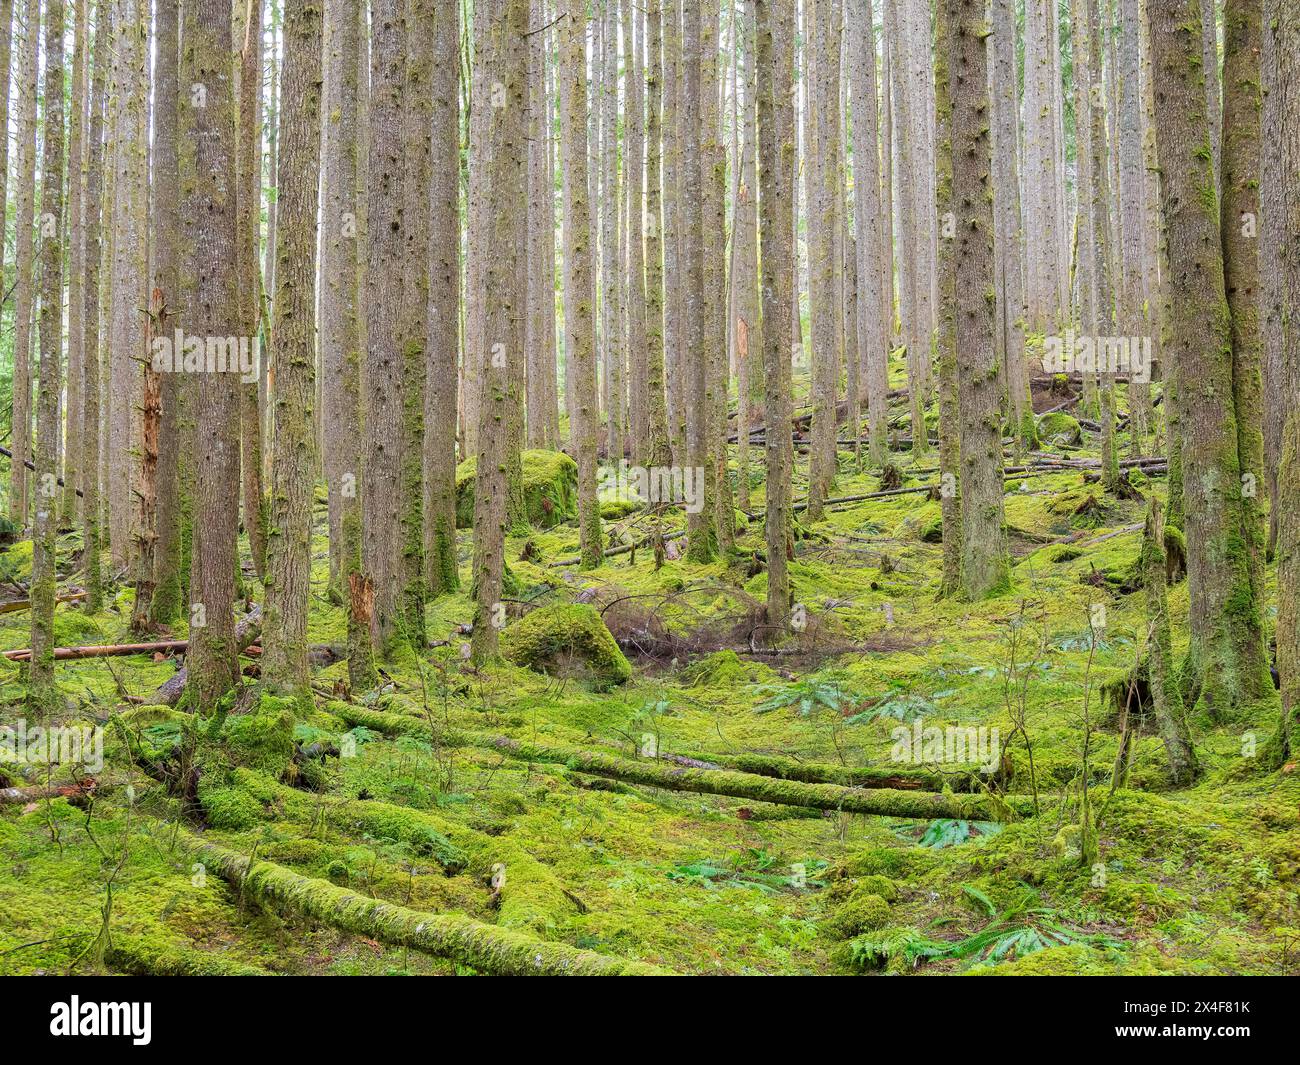 USA, Washington State. Central Cascades, Verdant moss covered understory in hemlock tree forest Stock Photo